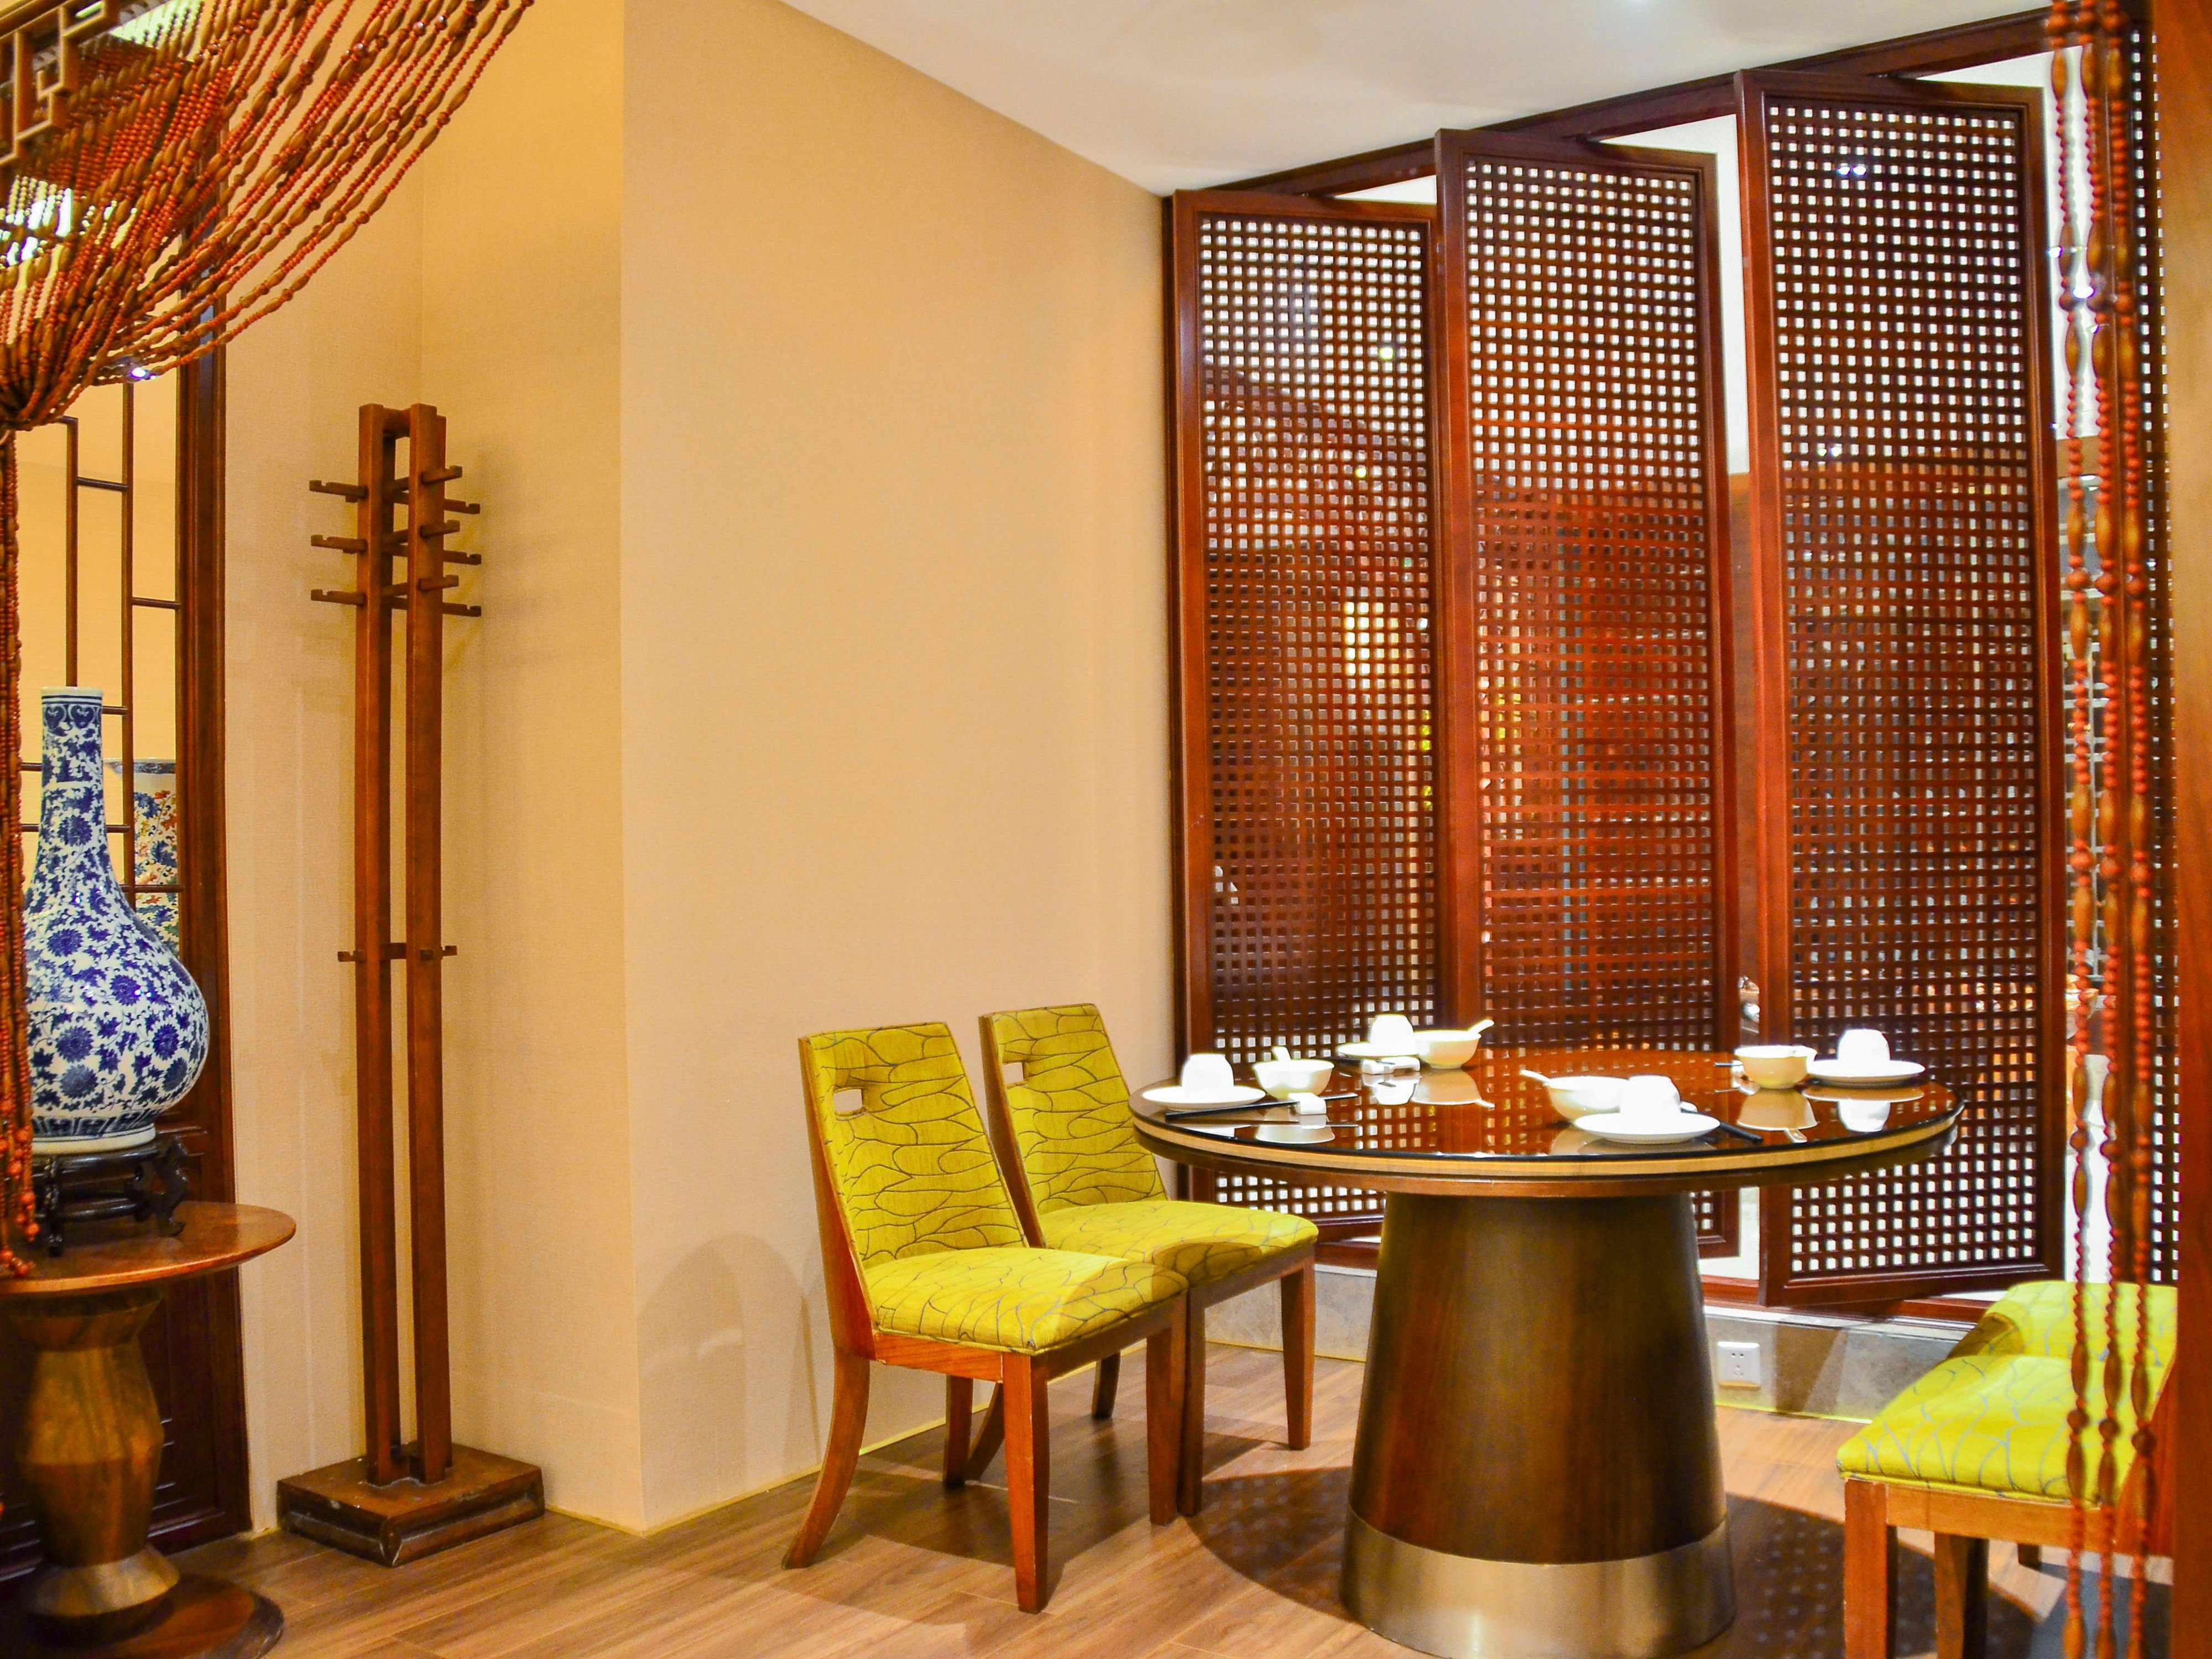 Cantonese Restaurant has 8 extraordinary private rooms. The restaurant offers authentic Cantonese cuisine featuring organic, fresh, healthy and nutritious specialties.